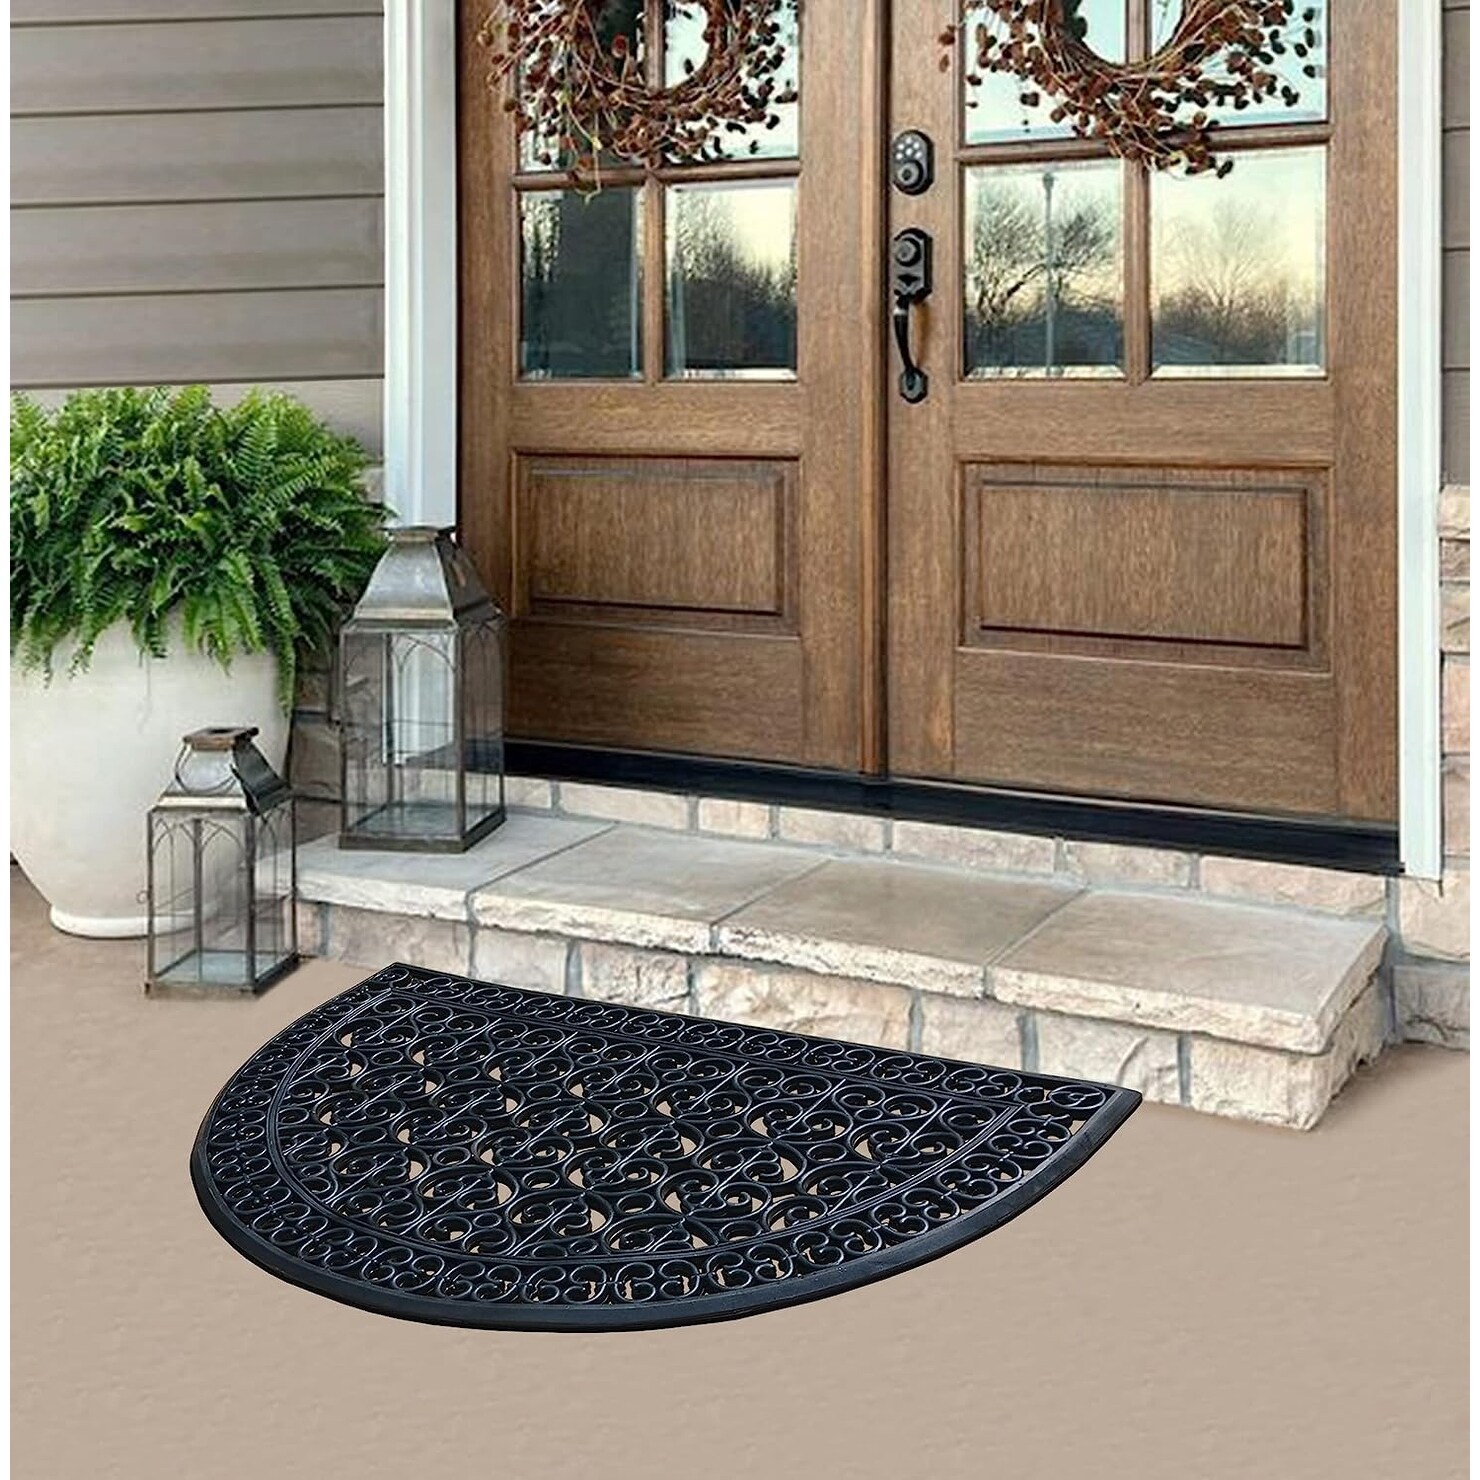 https://ak1.ostkcdn.com/images/products/is/images/direct/226592444e7e574b078afbd8659ca2c05f24244b/A1HC-Rubber-Grill-Matching-Doormat-Set%2C-For-Front%2C-Patio-%26-Garage-Entrance%2C-Heavy-Duty-for-Indoor-Outdoor.jpg